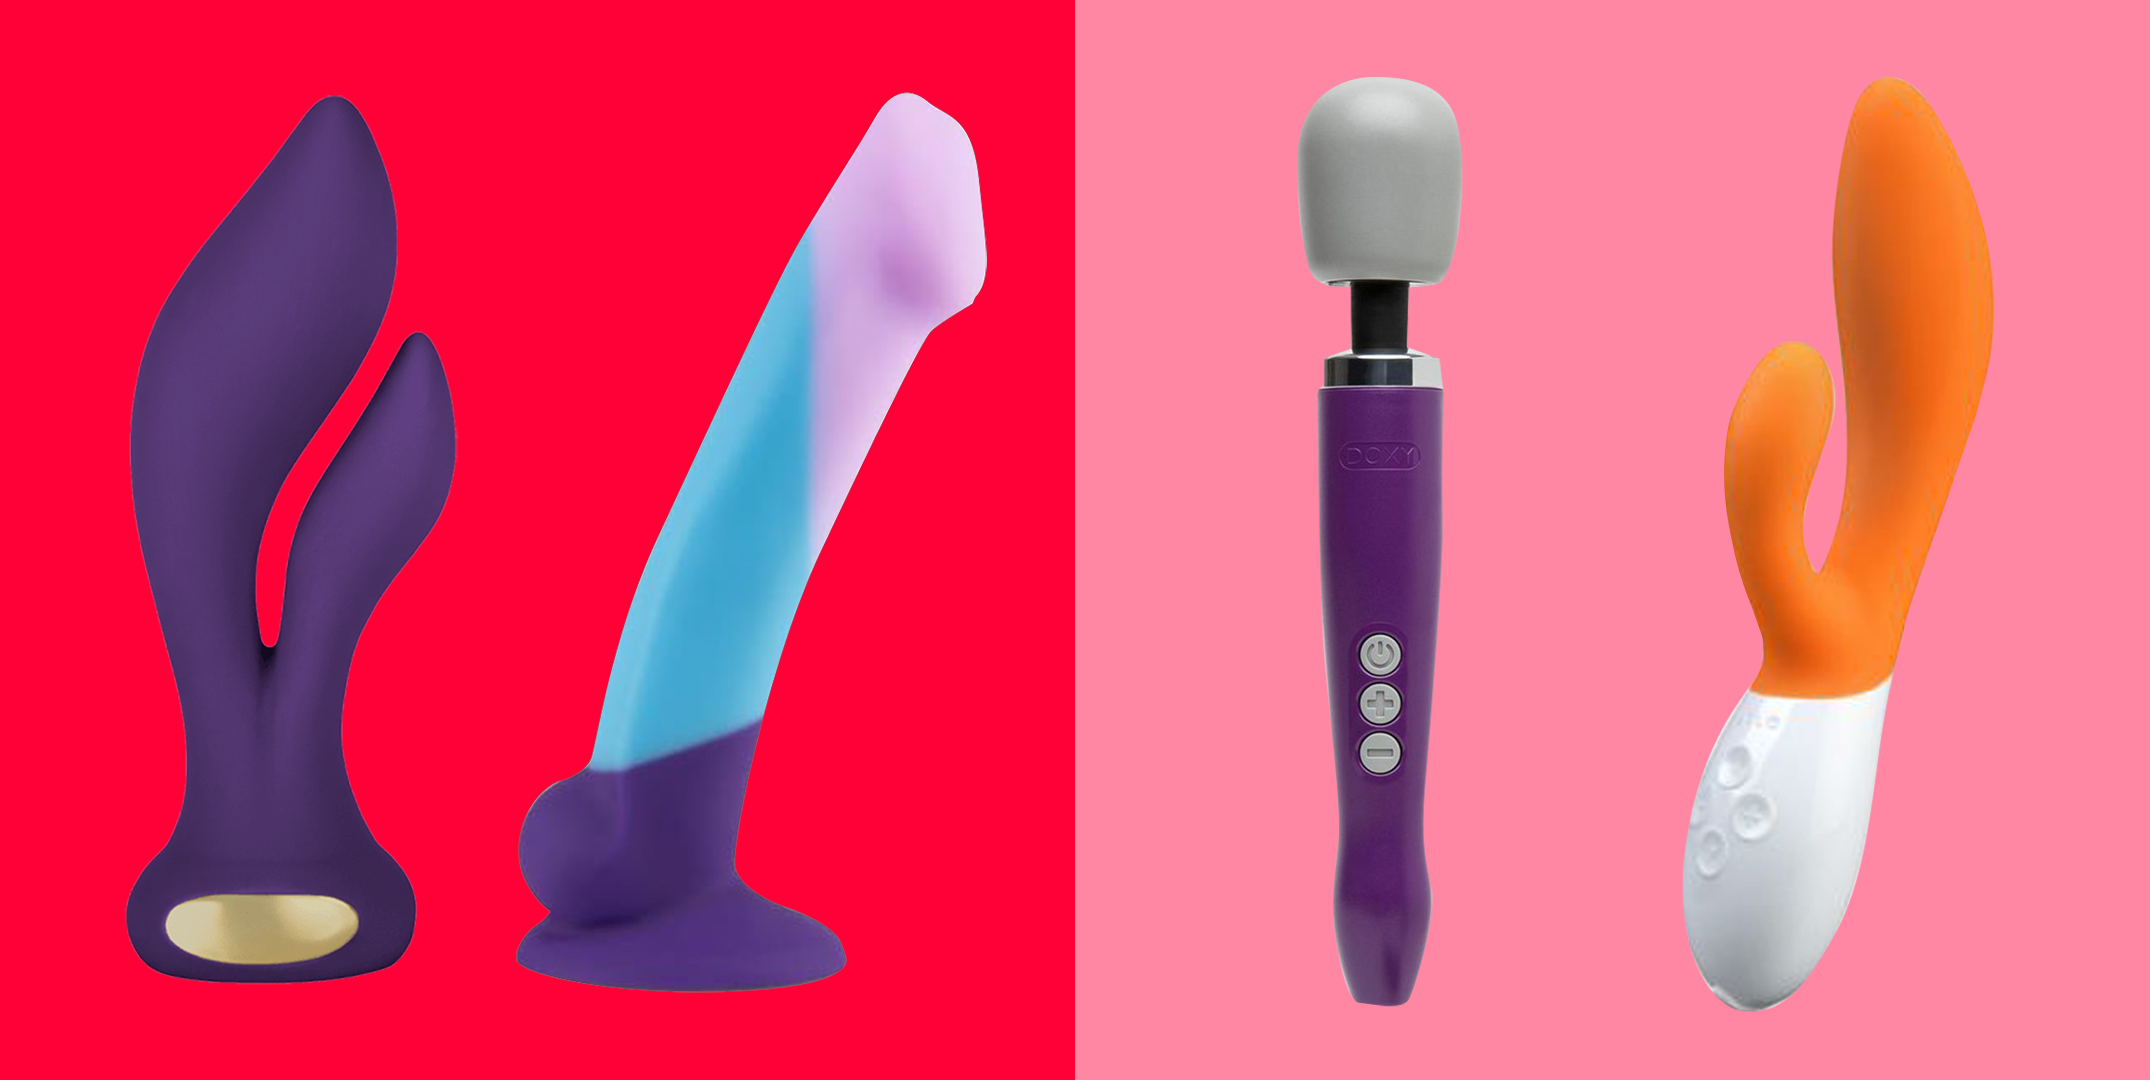 Mary uses A Vibrator For The First Time In Her Life